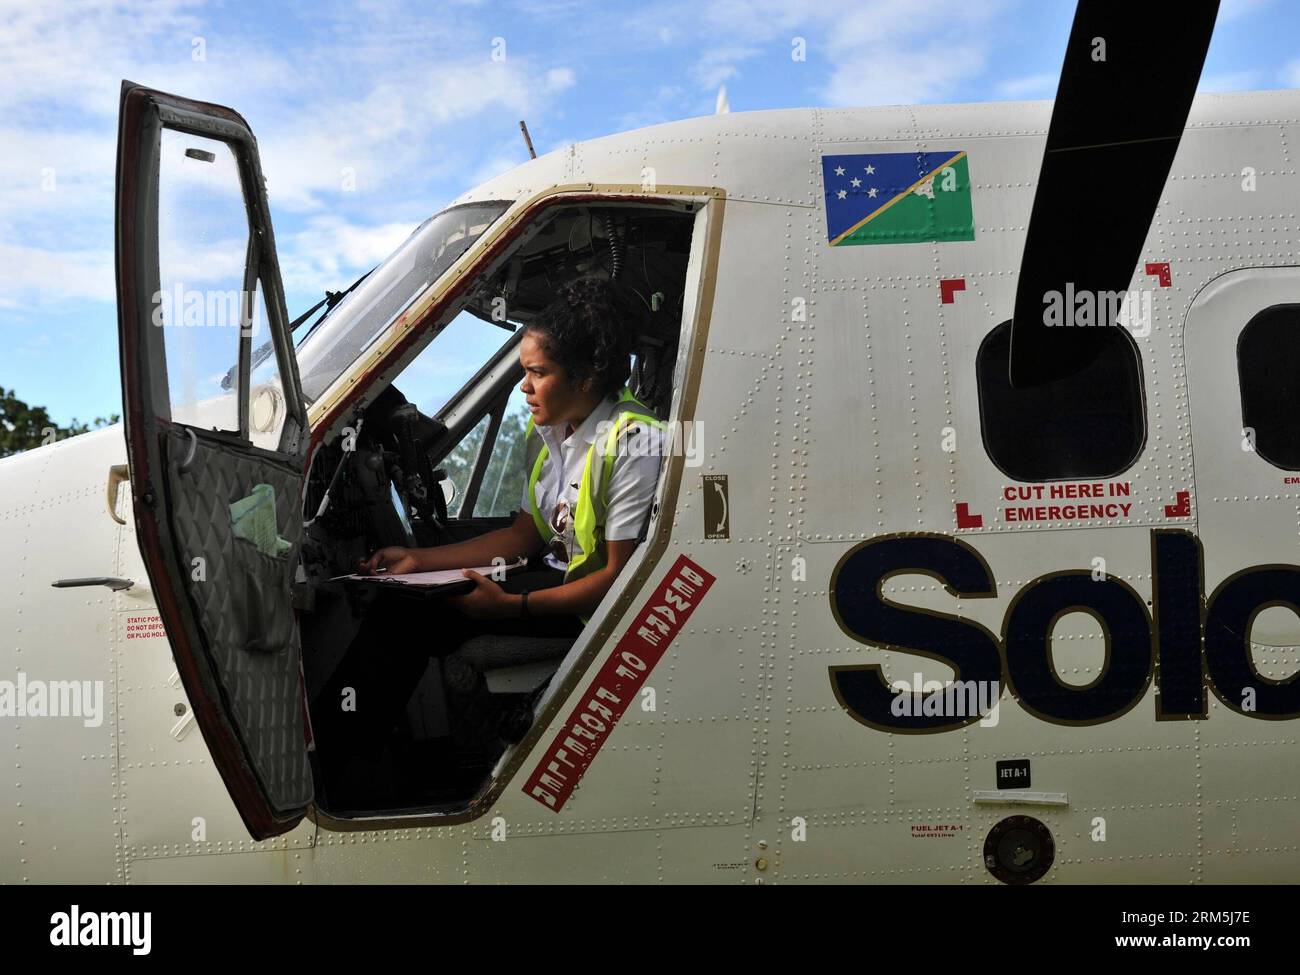 Bildnummer: 60669188  Datum: 29.10.2013  Copyright: imago/Xinhua A pilot is on board of a Twin Otter lightplane which has served 30 years in Solomon Islands, Oct. 29, 2013. The Solomon Airlines owns a history of more than 50 years. The DHC 8-102 , Twin Otter and Islander are three kinds of vintage lightplanes serving for national flights which can respectively carry 36, 16 and 9 passengers. Most of these planes have served more than ten years or even dozens of years. (Xinhua/Gao Jianjun) SOLOMON ISLANDS-SOLOMON AIRLINES-VINTAGE LIGHTPLANES PUBLICATIONxNOTxINxCHN xcb x0x 2013 quer     60669188 Stock Photo